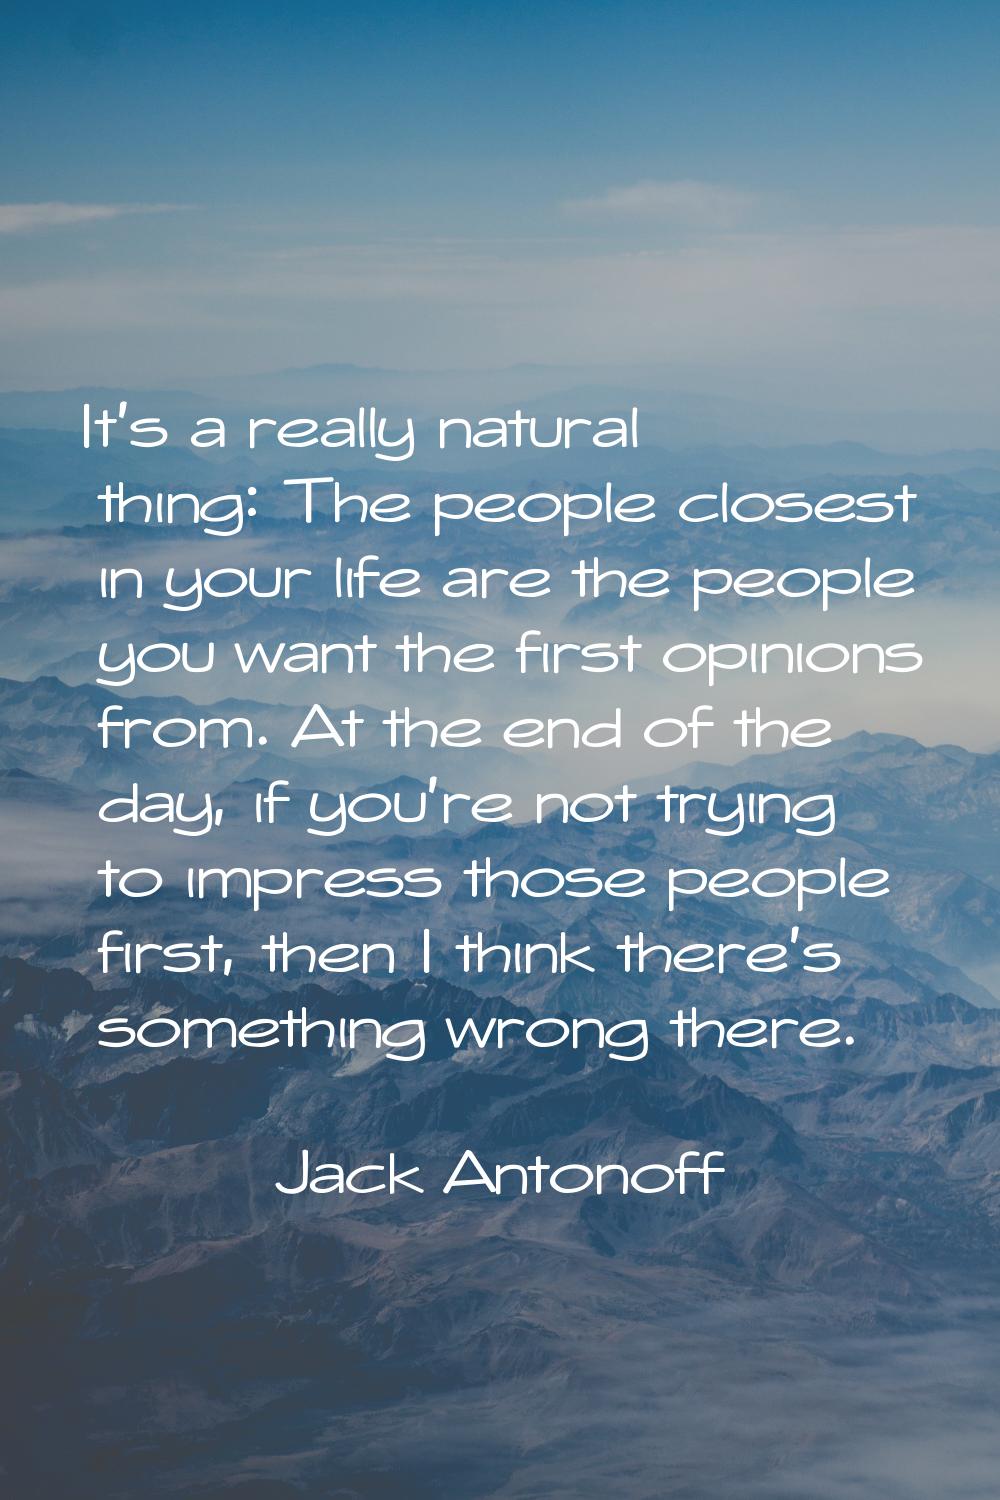 It's a really natural thing: The people closest in your life are the people you want the first opin